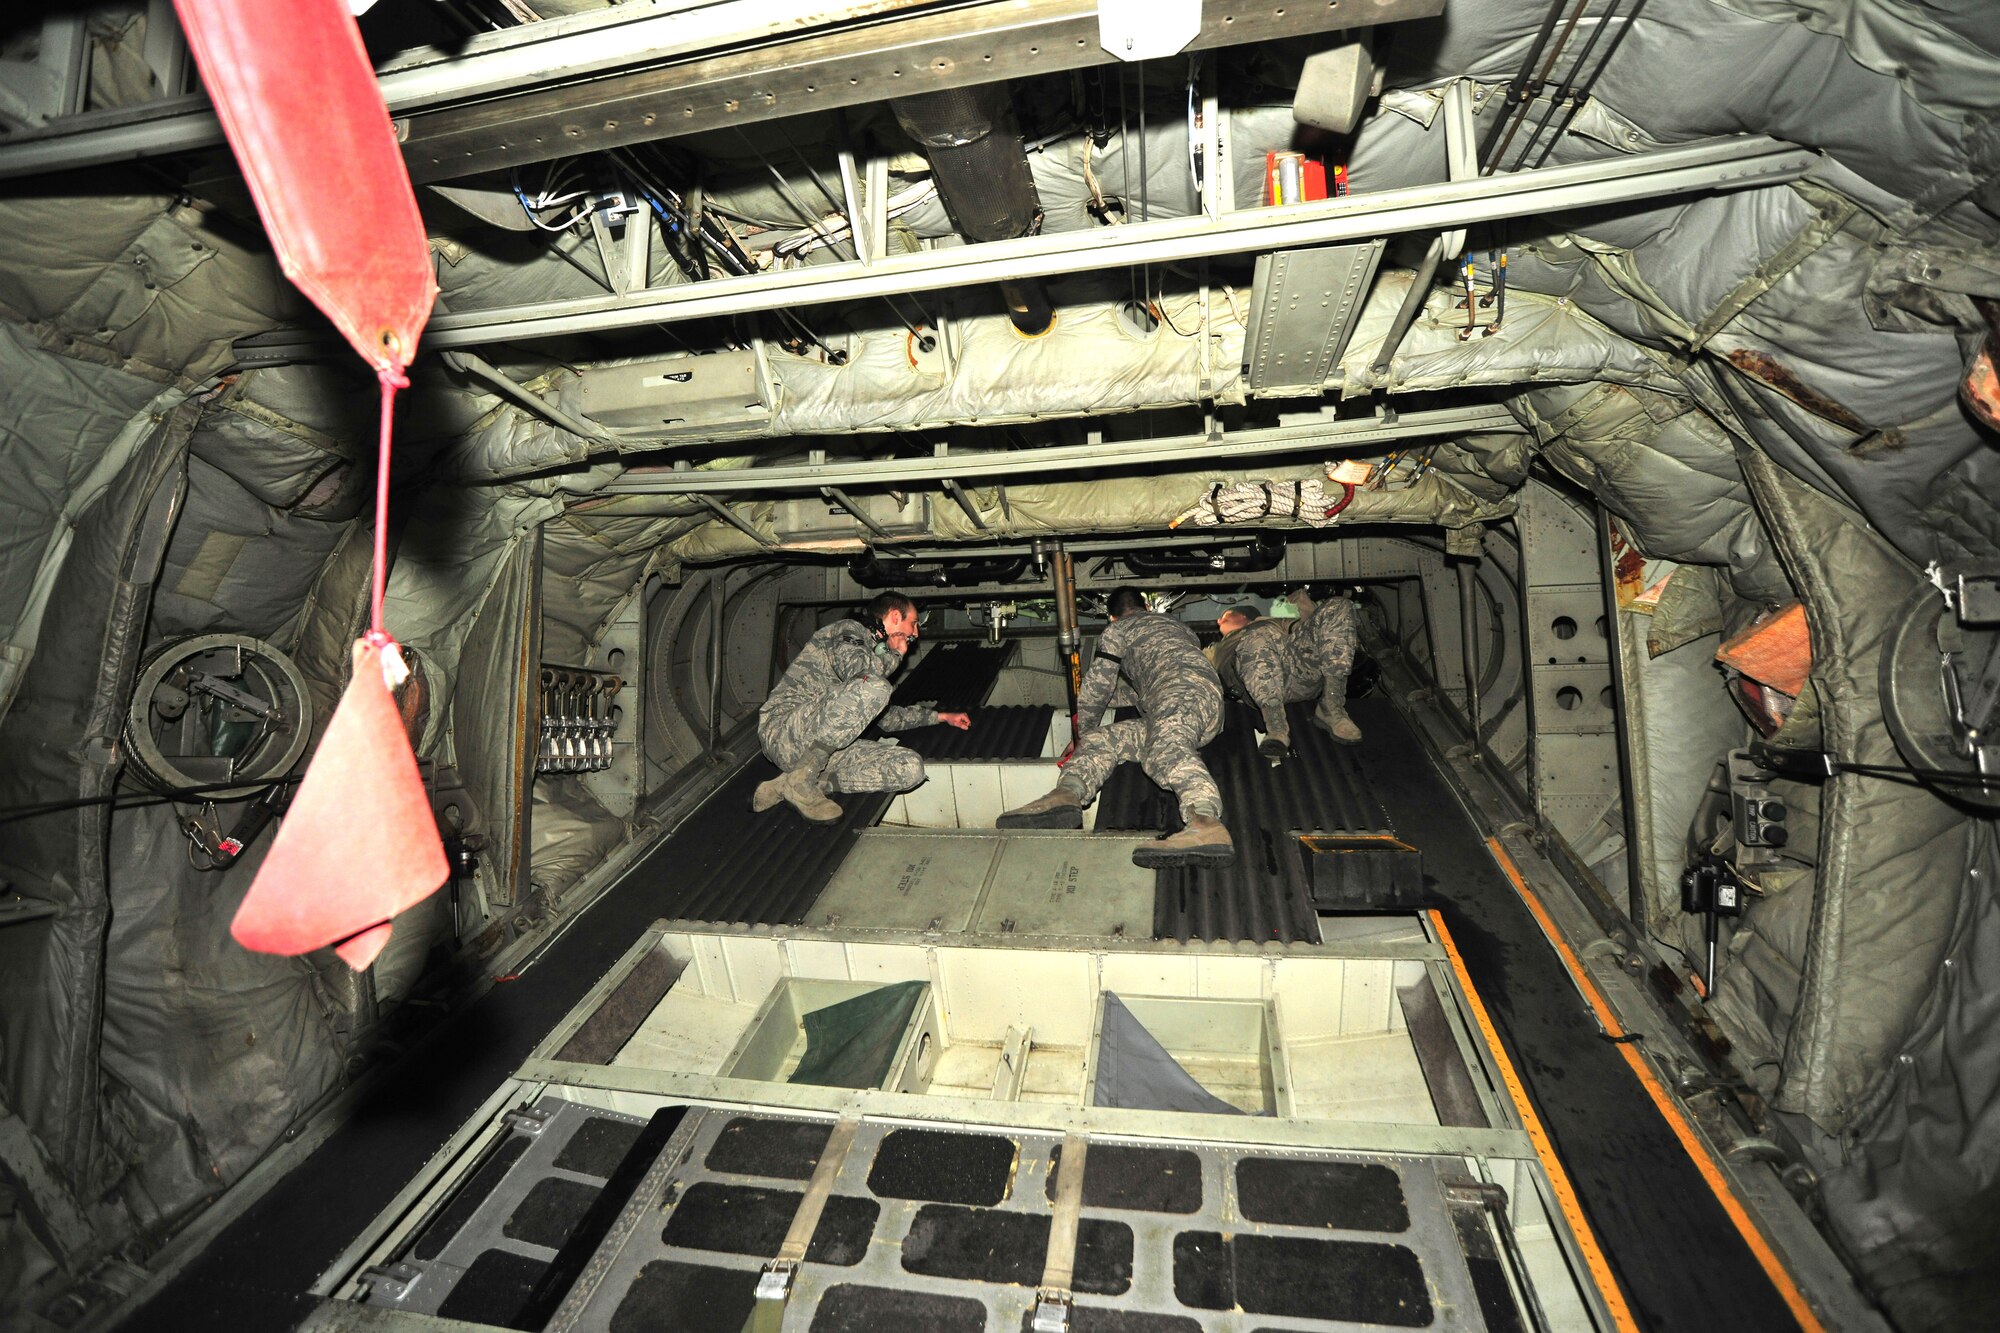 Three Airmen of the 166th Maintenance Squadron, Delaware Air National Guard at the New Castle ANG Base, Del., April 10, 2015, perform elevator boost pack maintenance on a C-130 Hercules transport aircraft. The aircraft will be flown April 11 during Operation Cyclone, a Delaware National Guard joint training exercise when Airmen and Soldiers will respond to a simulated tornado that has swept through New Castle County. Army Black Hawk helicopters will evacuate simulated wounded personnel to the air base, with patients loaded onto C-130s for aerial evacuation. Separate from the exercise, on April 12, six C-130s will participate in the largest formation flown by the wing since departing for Southwest Asia in March 2003 to support Operation Iraqi Freedom. (U.S. Air National Guard photo by Staff Sgt. John Michaels)